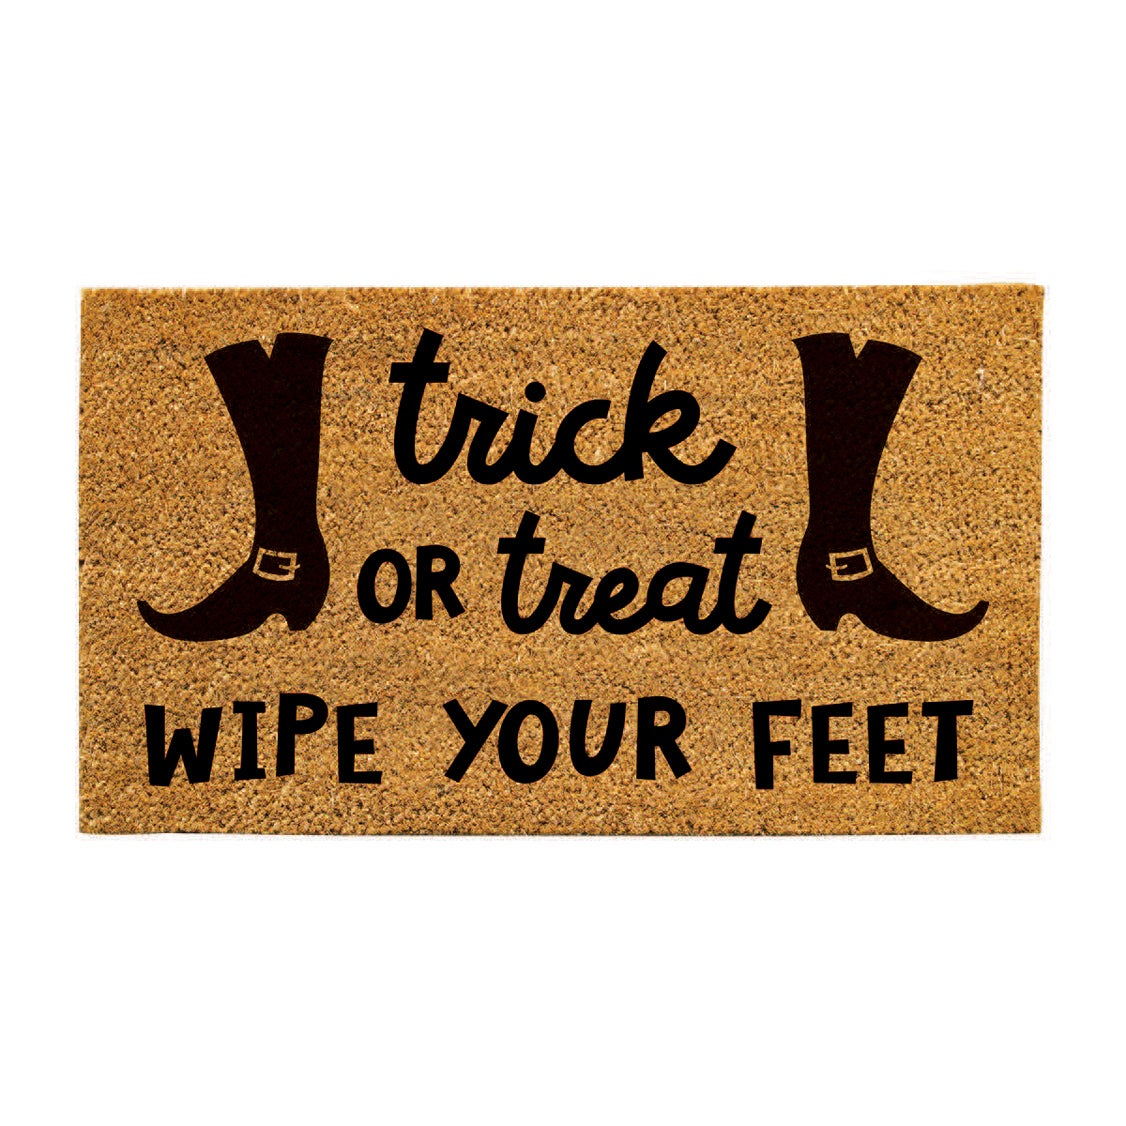 28" x 16" Nature Coir Mat, Trick or Treat Wipe Your Feet